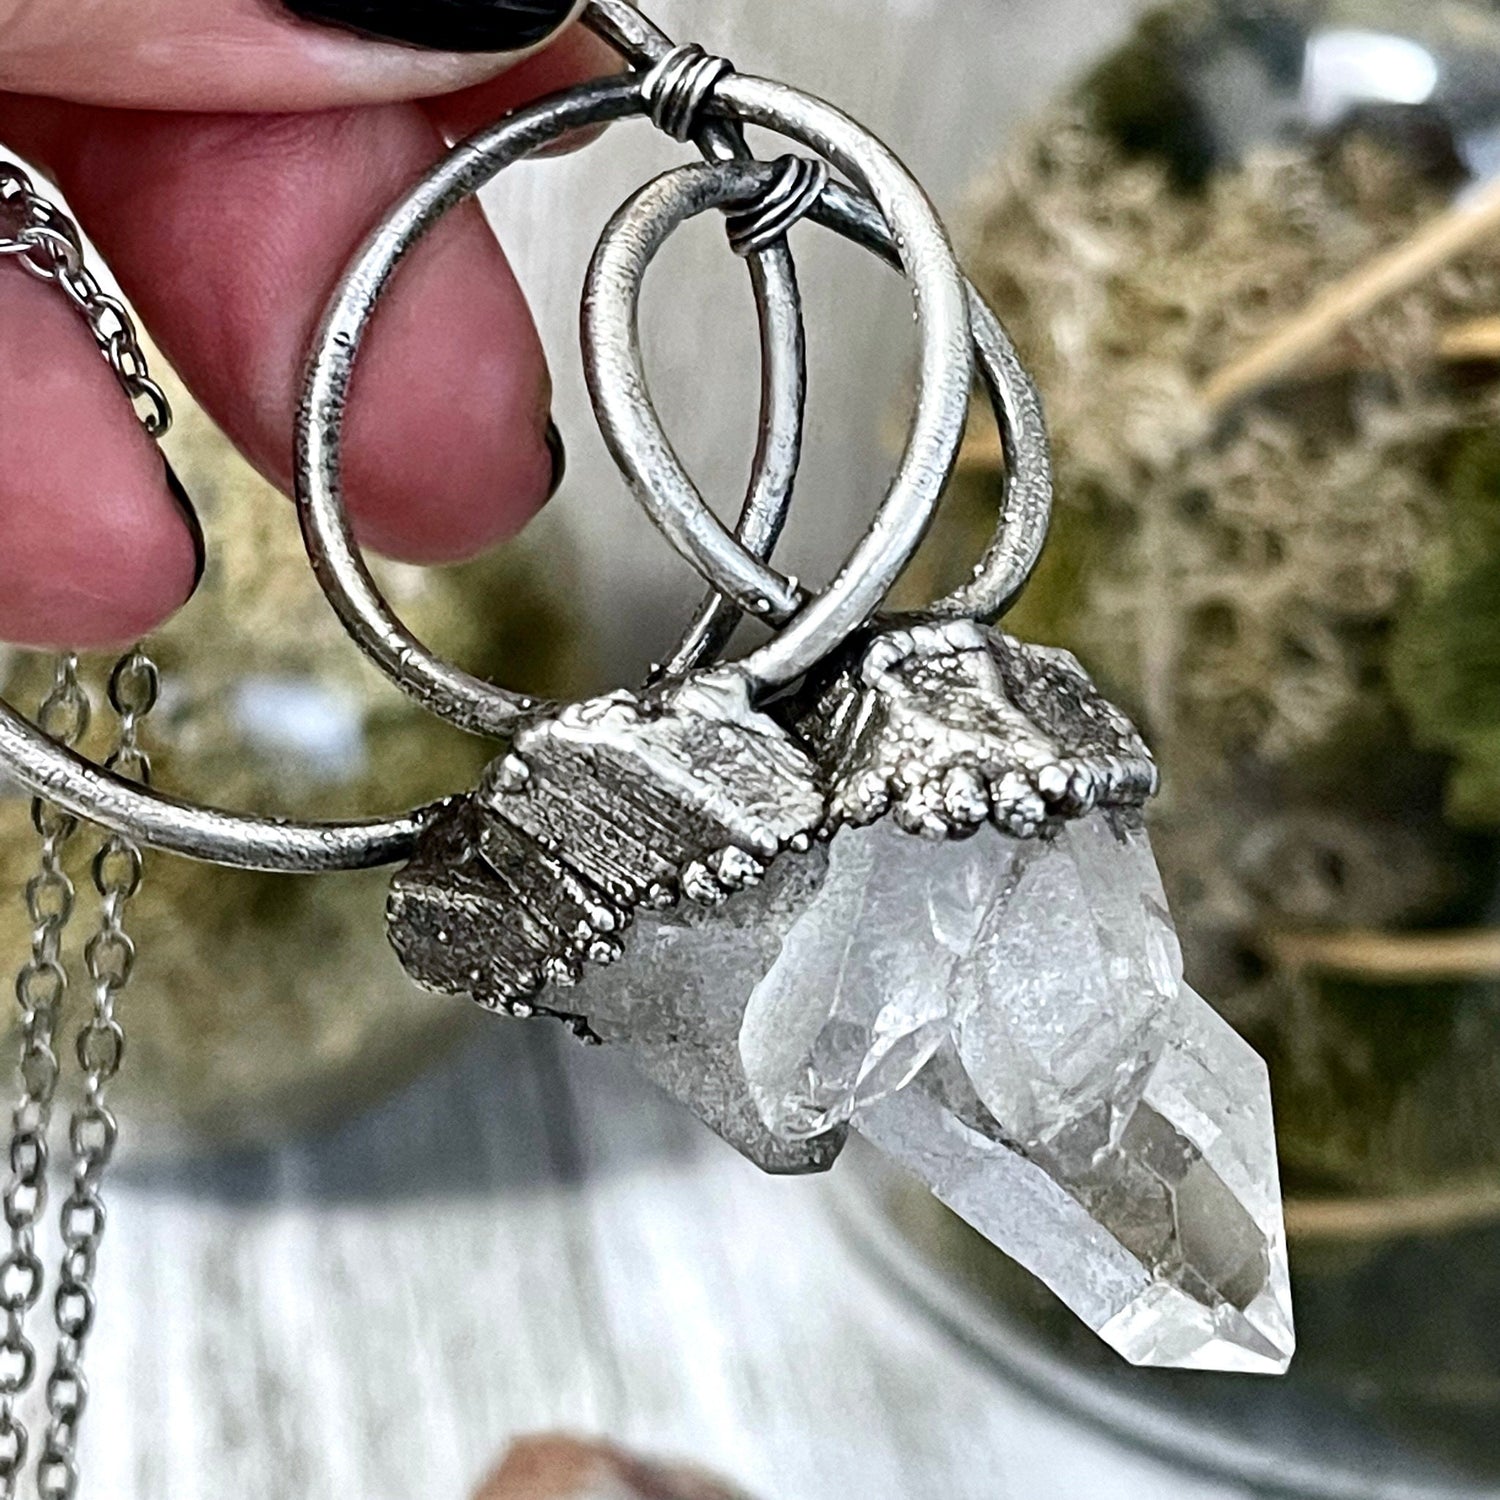 Raw Clear Quartz Cluster Crystal Statement Necklace in Fine Silver / Foxlark Collection - One of a Kind